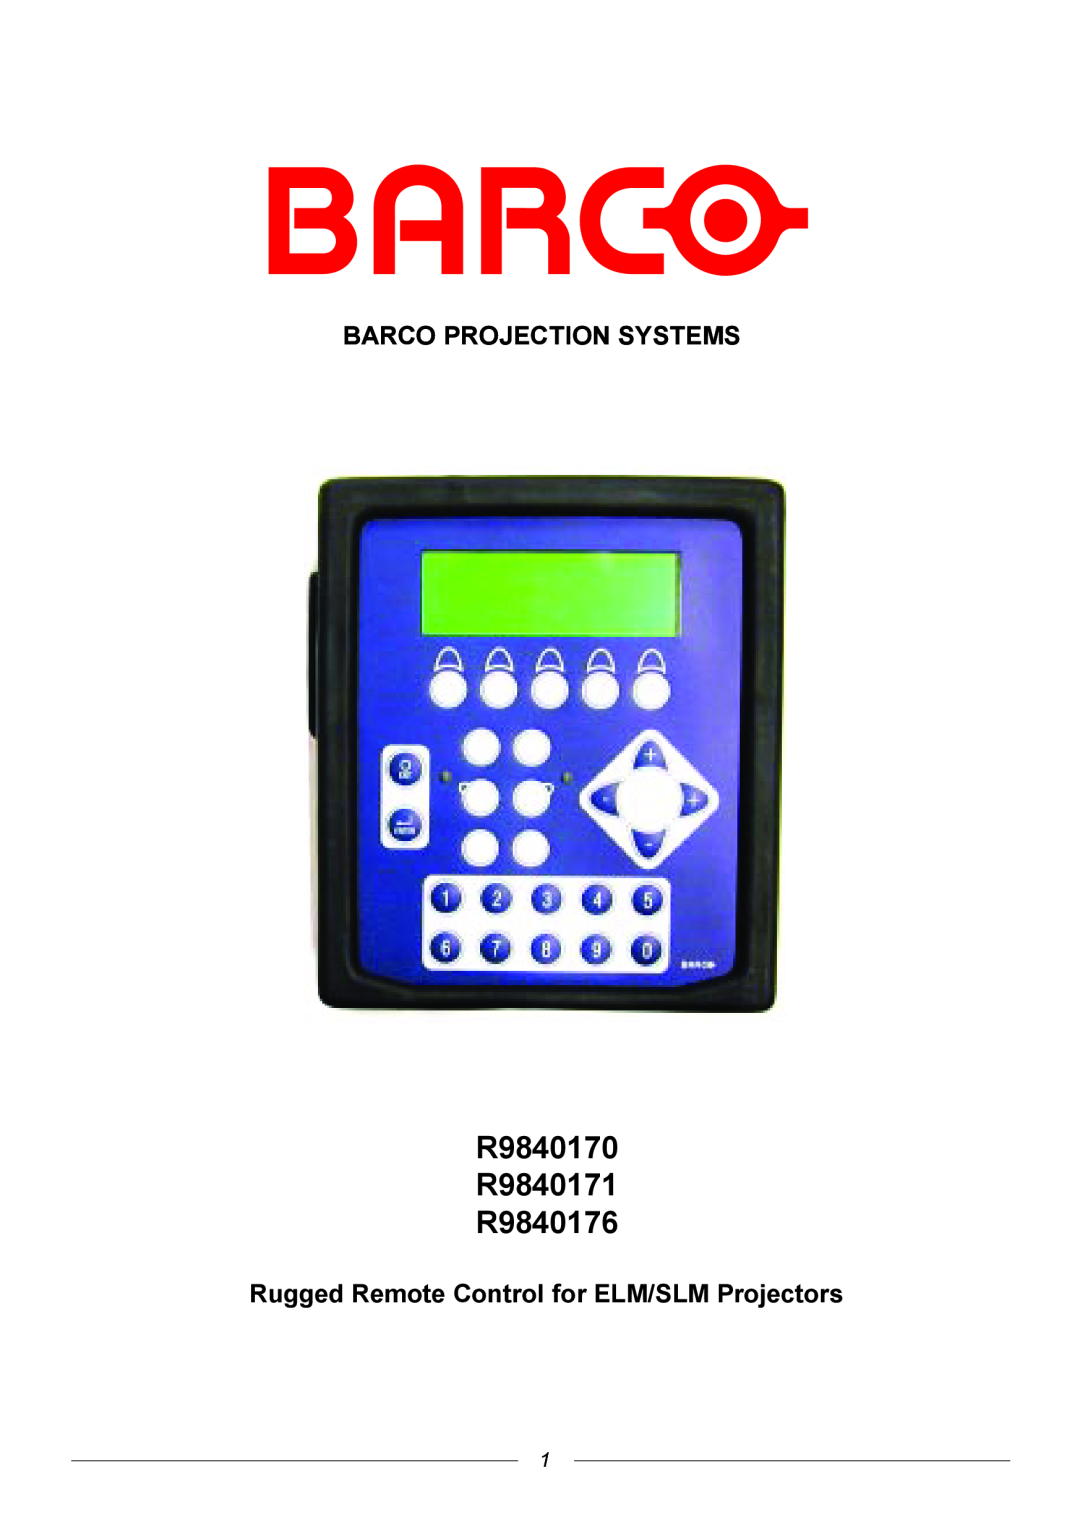 Barco manual R9840170 R9840171 R9840176, Barco Projection Systems, Rugged Remote Control for ELM/SLM Projectors 